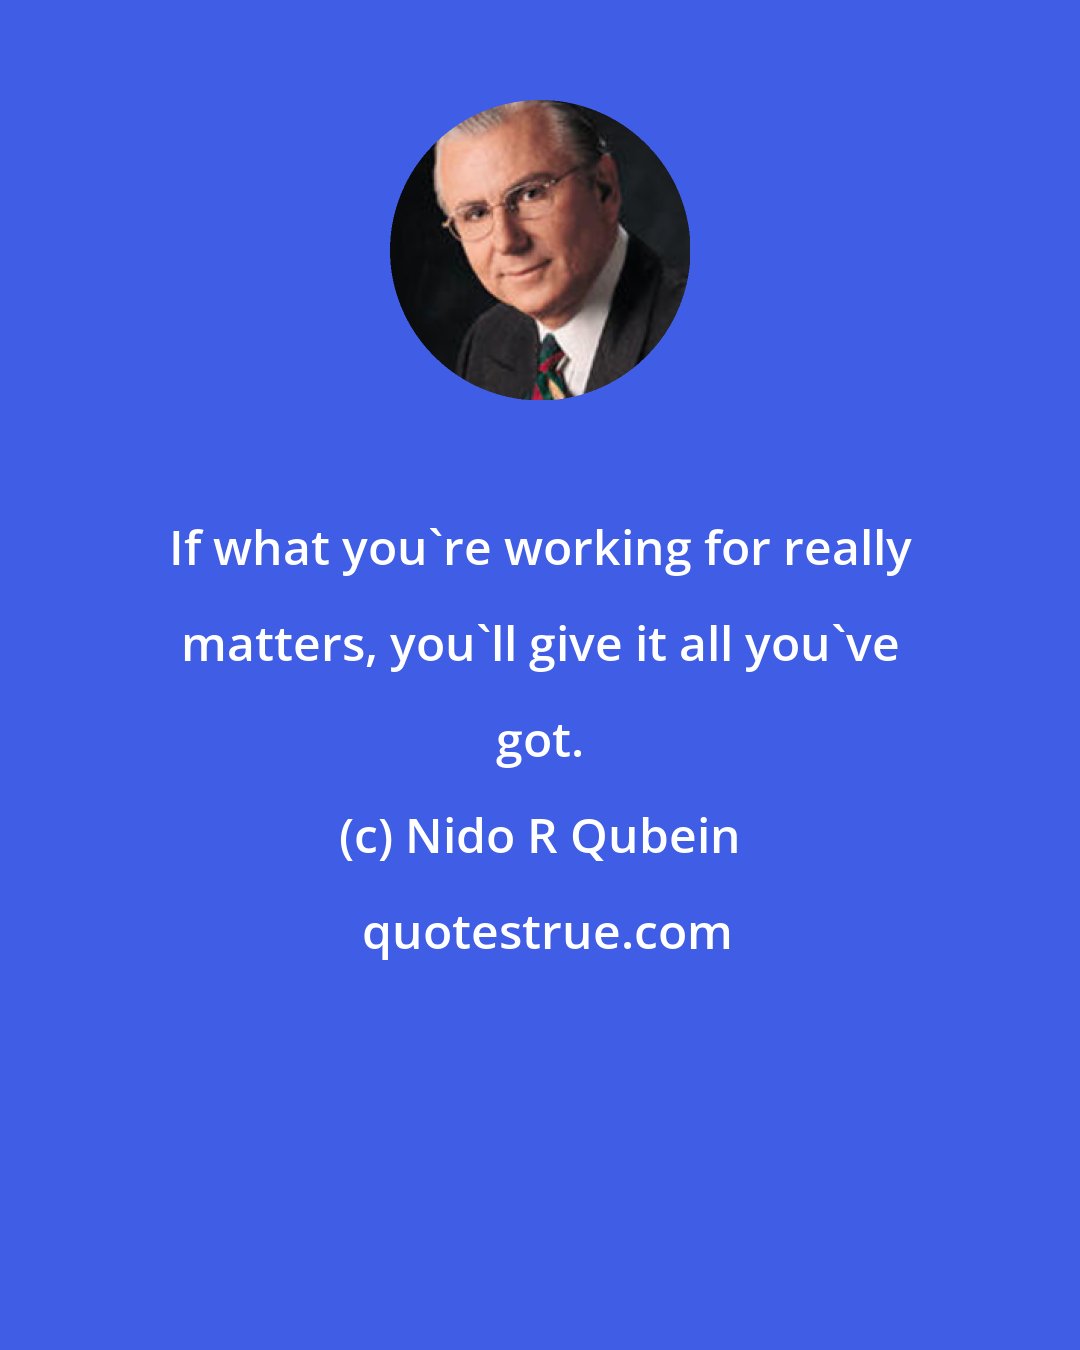 Nido R Qubein: If what you're working for really matters, you'll give it all you've got.